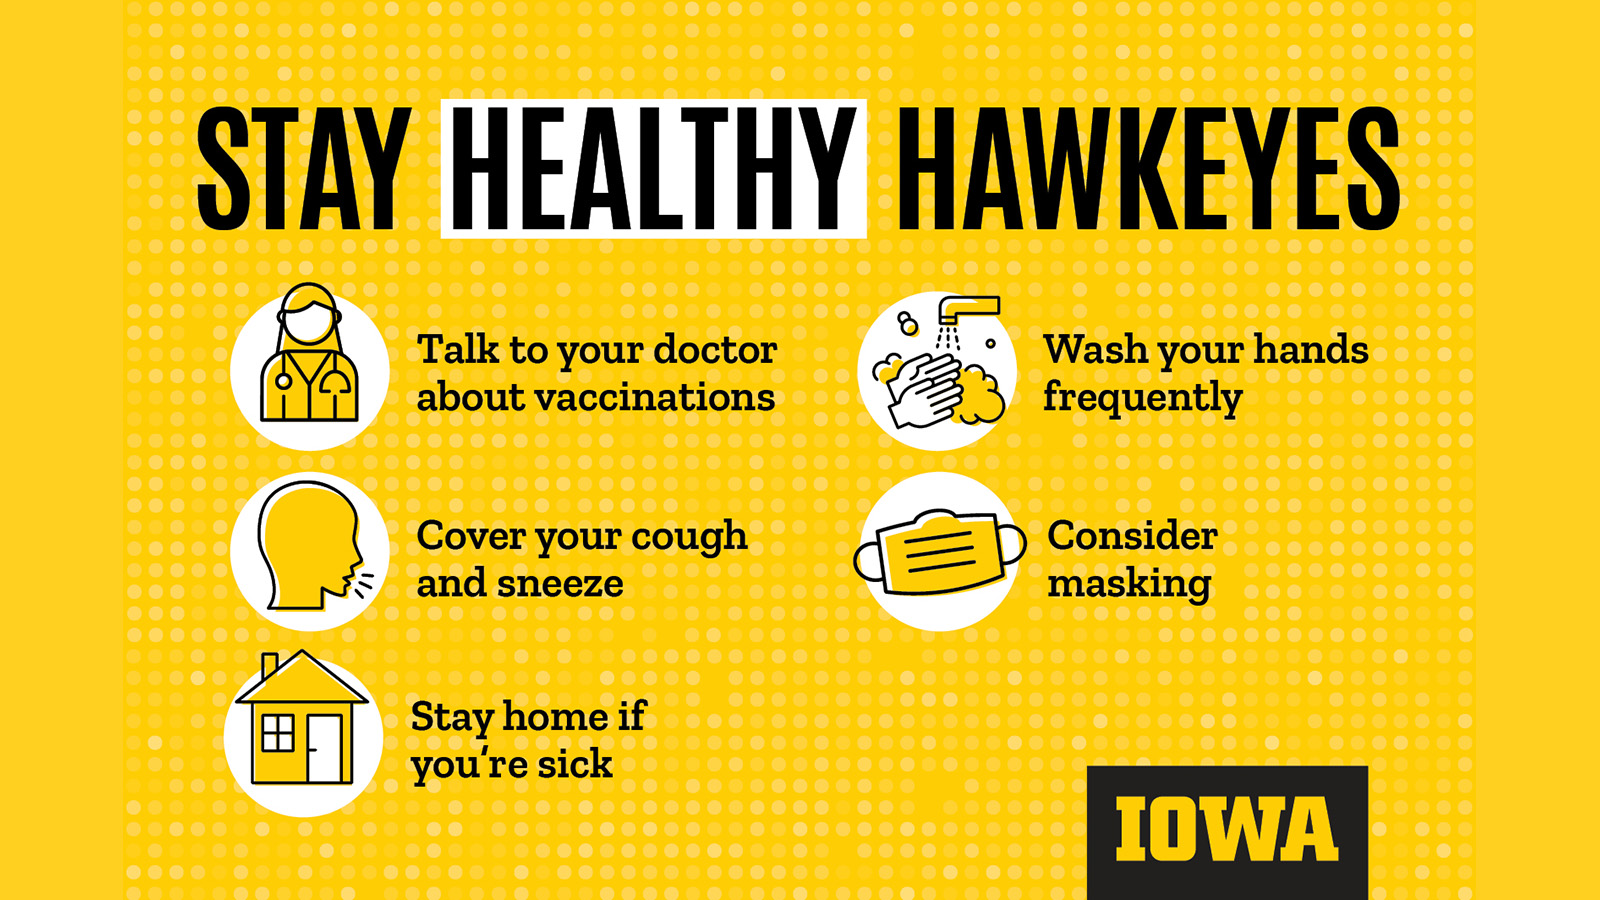 Stay Healthy Hawkeyes! Cover coughs, wash hands, stay home if sick, consider masking